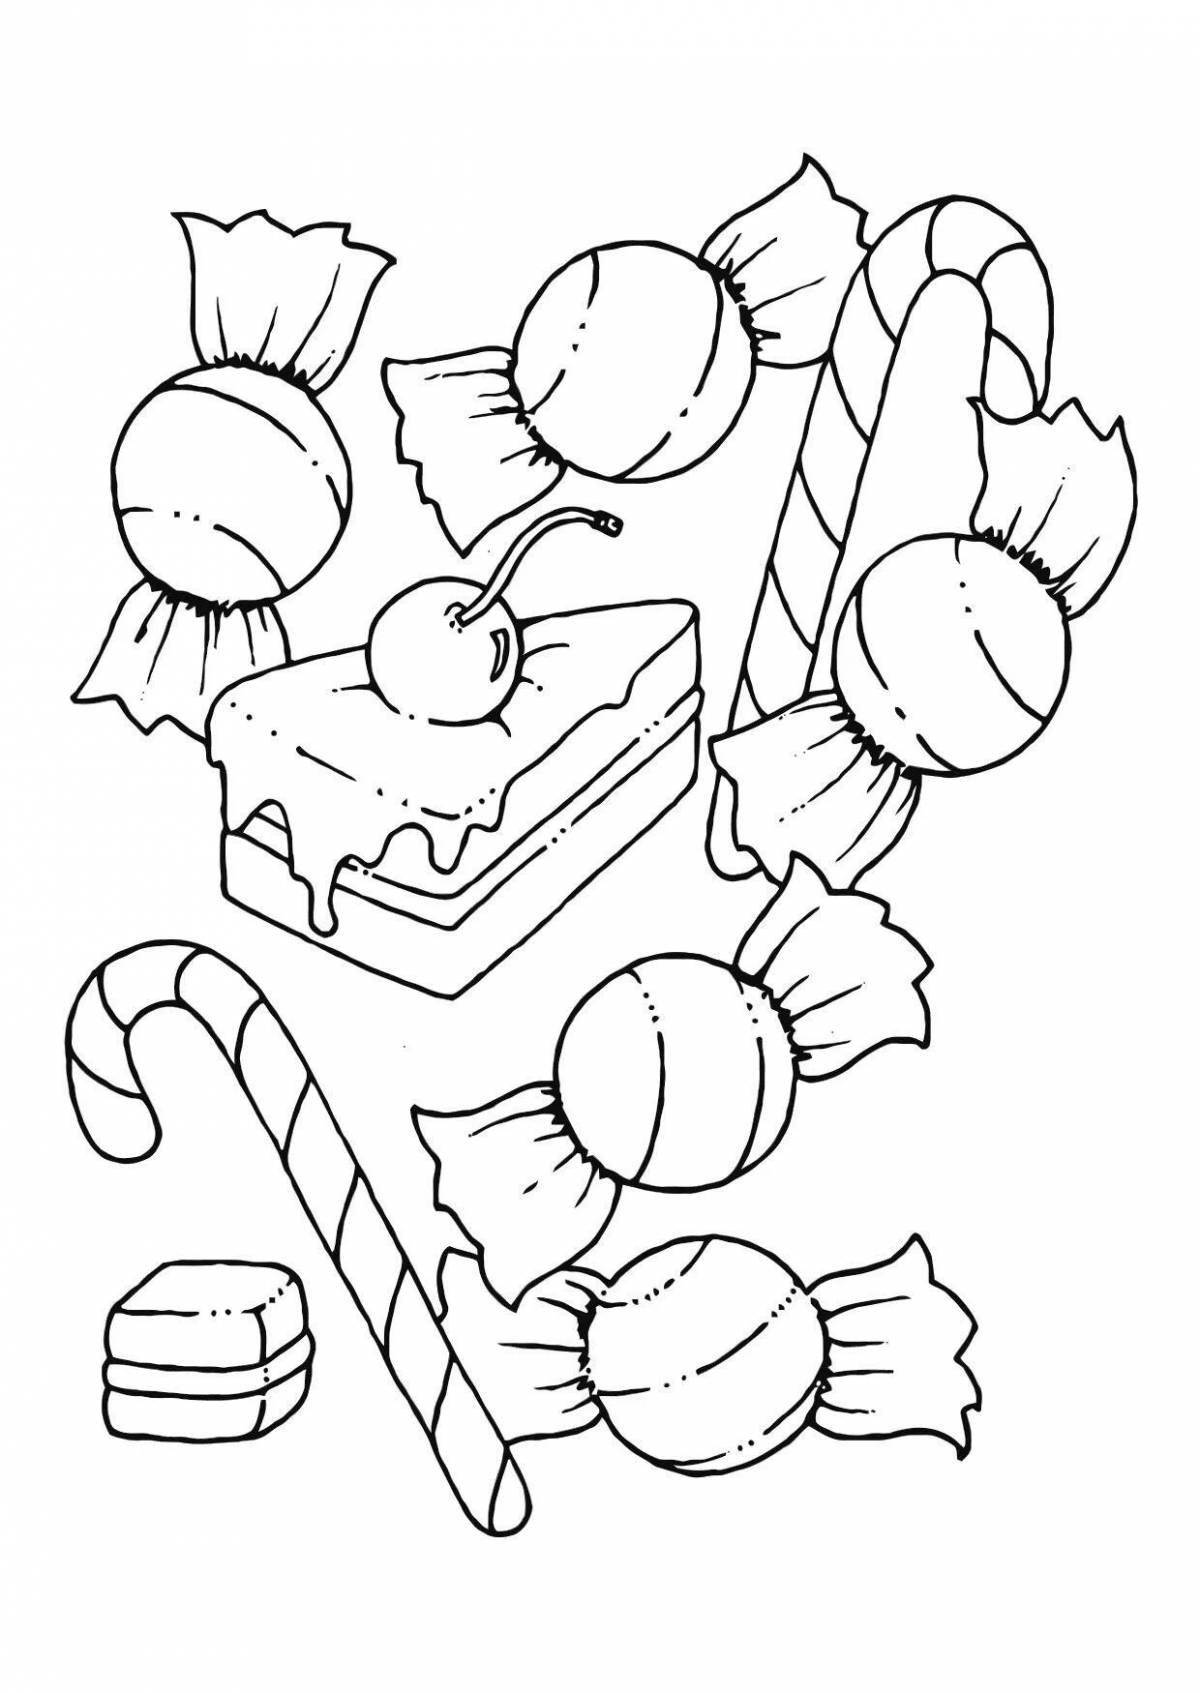 Coloring page adorable candy figurine